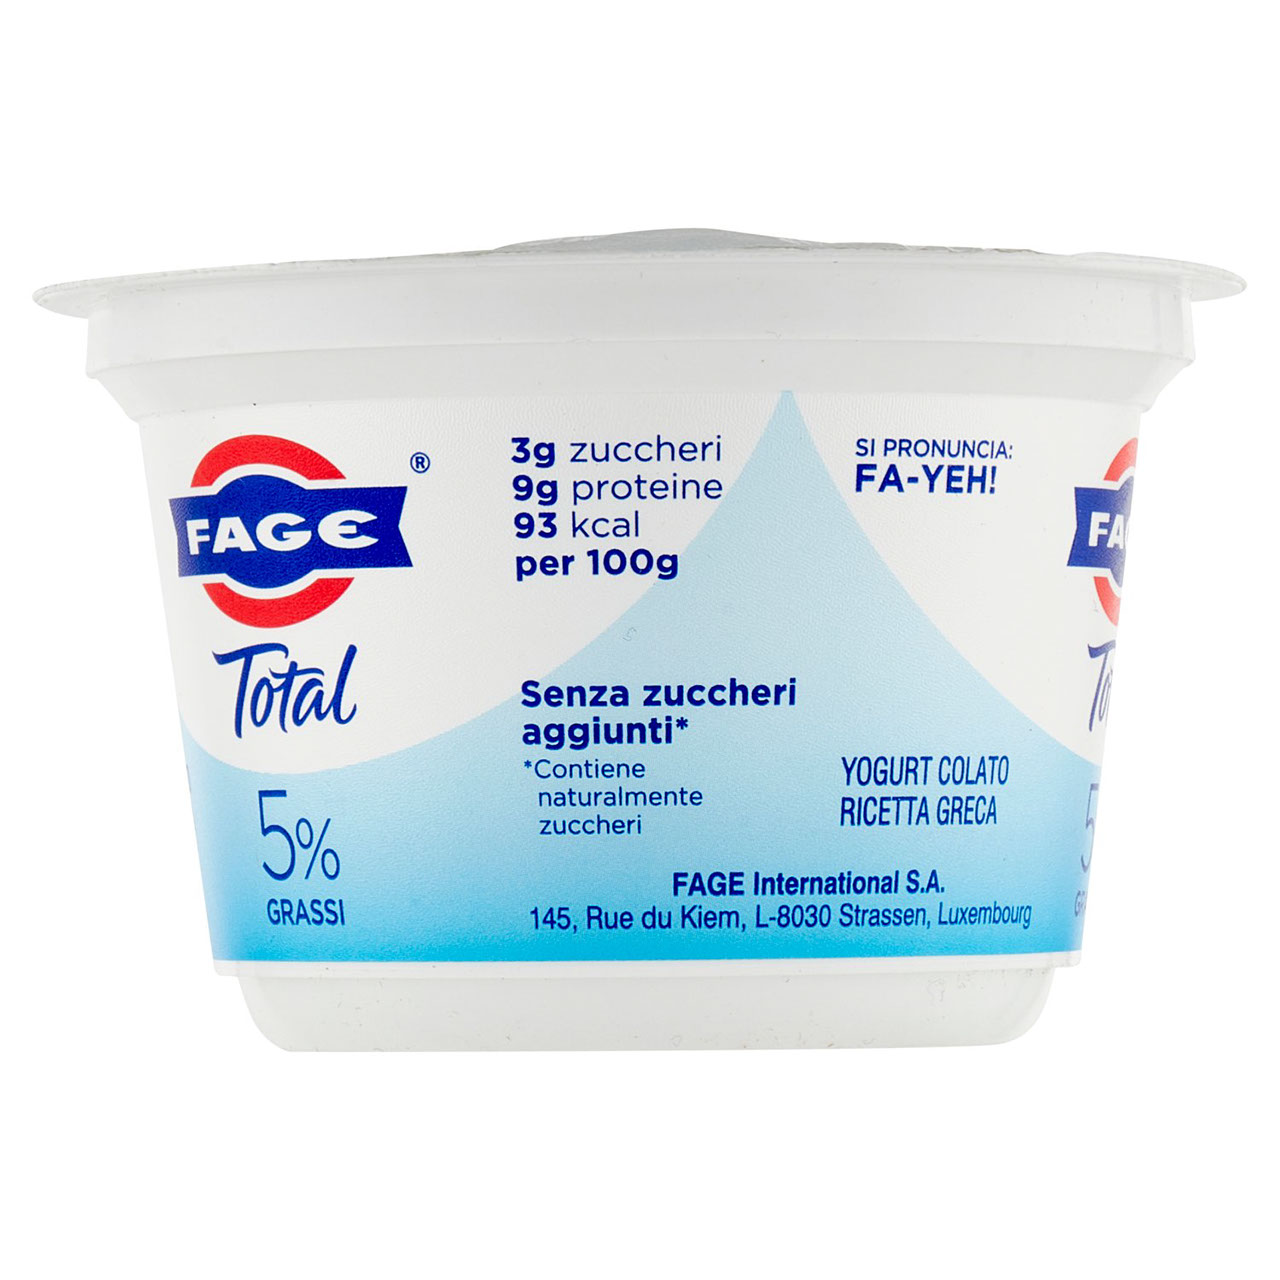 Fage Total 5% Grassi 150 g